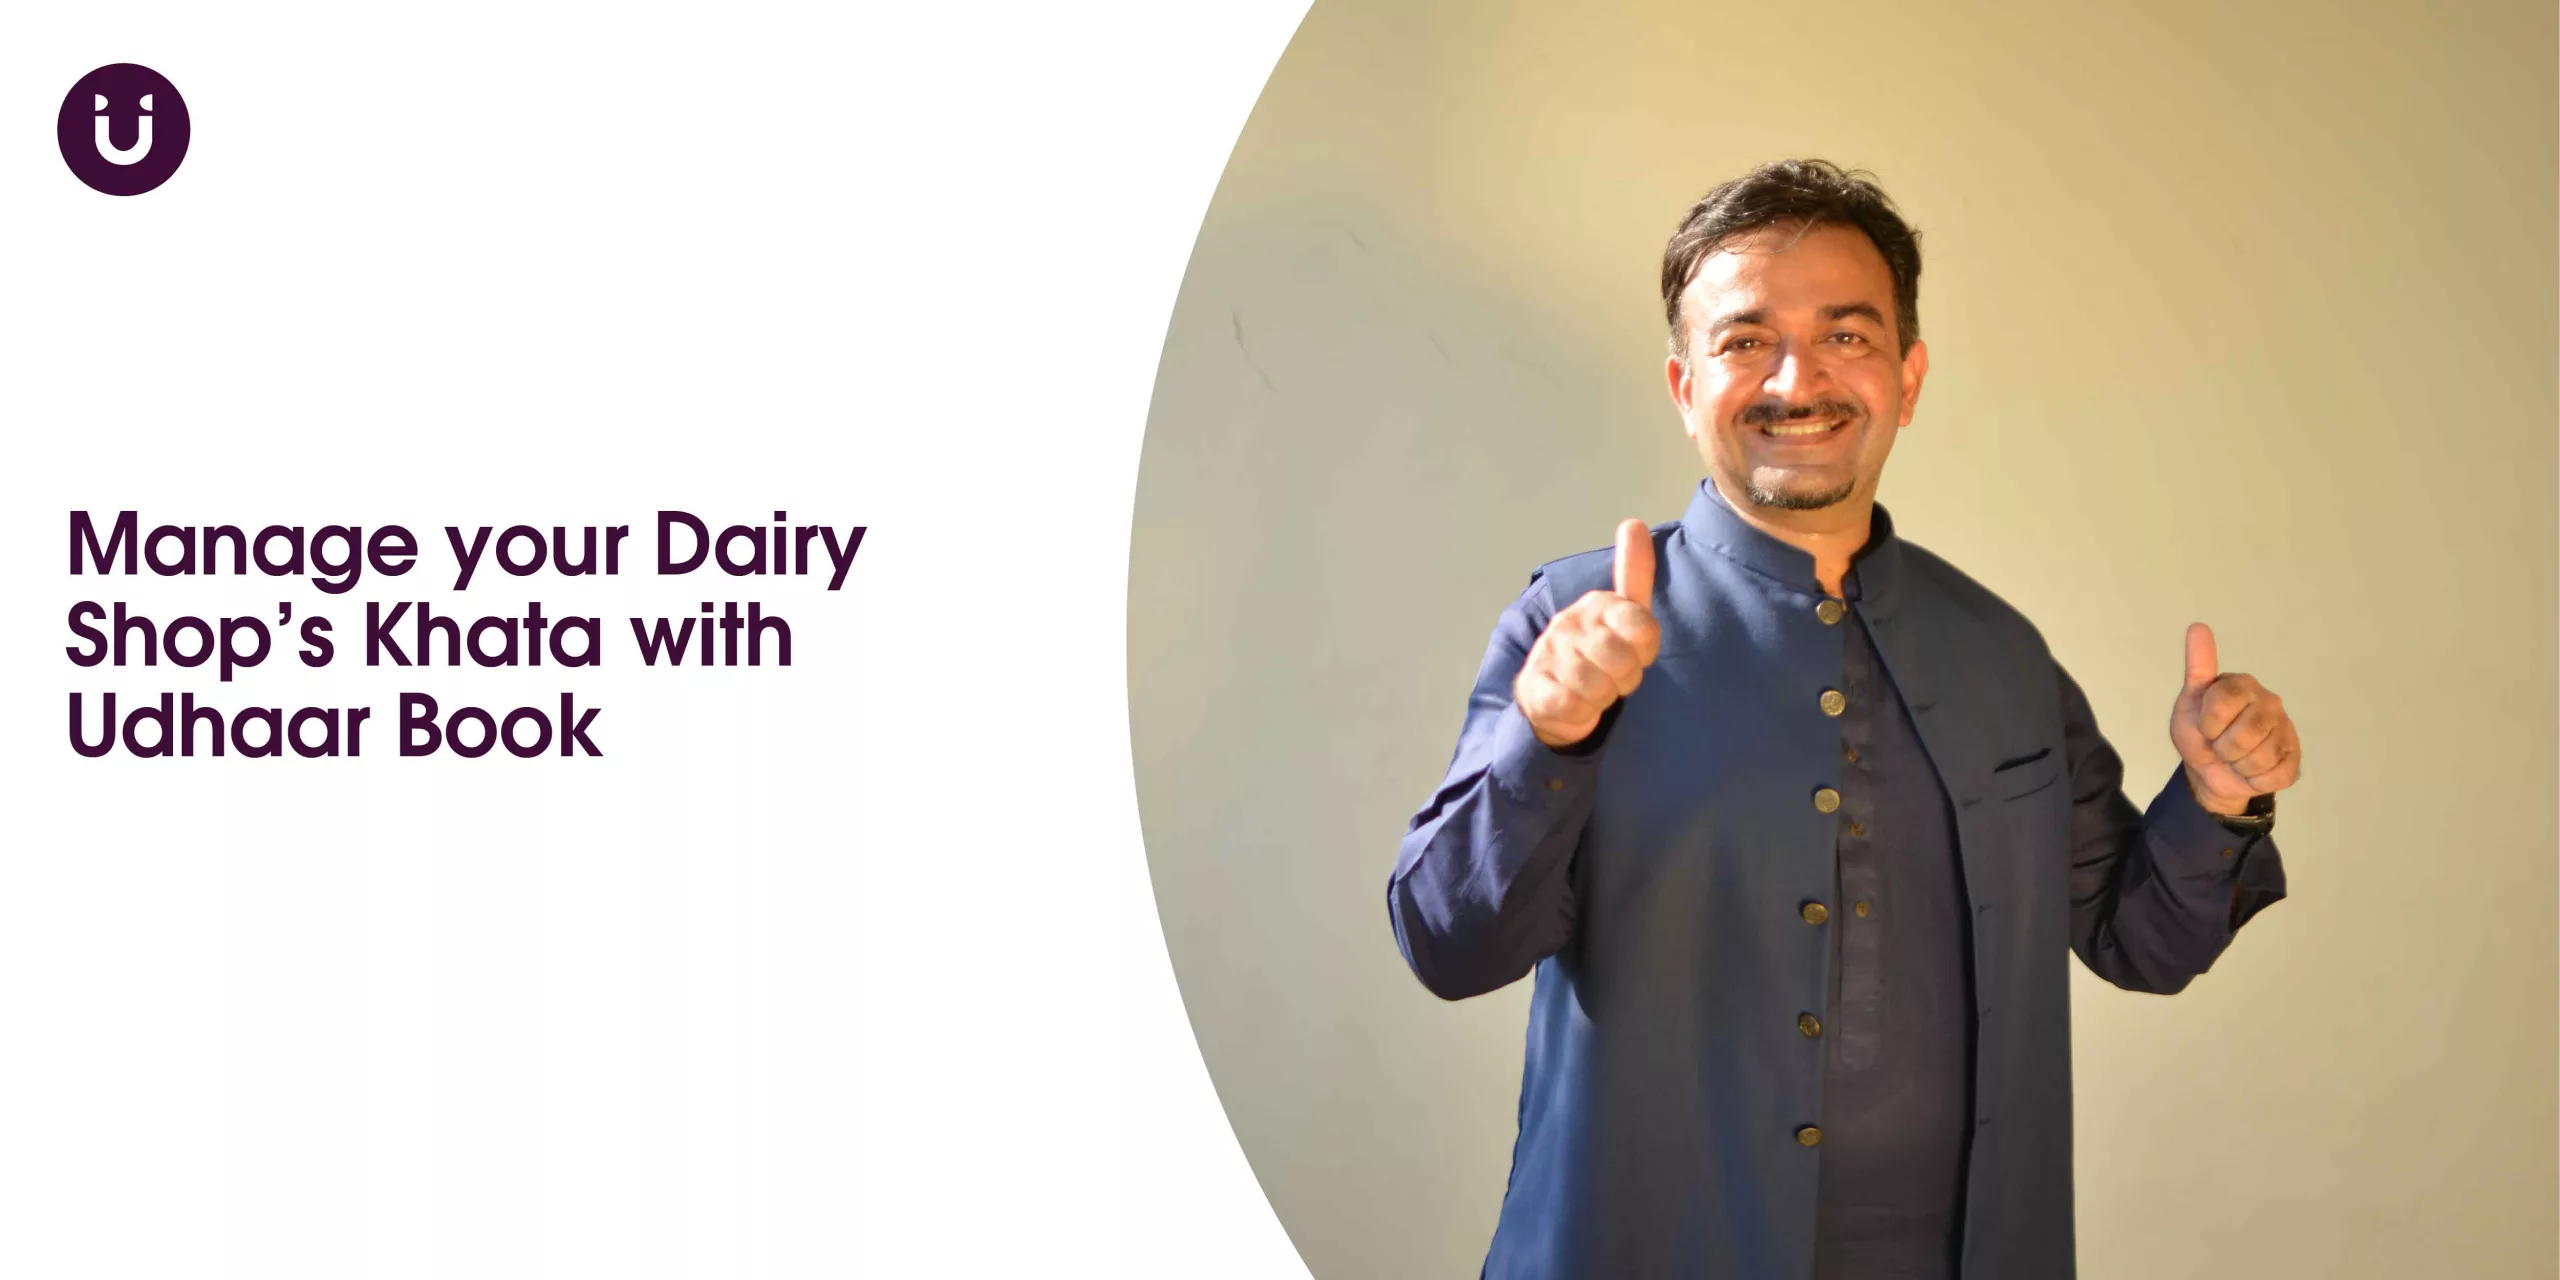 Manage your Dairy Shop’s Khata with Udhaar Book